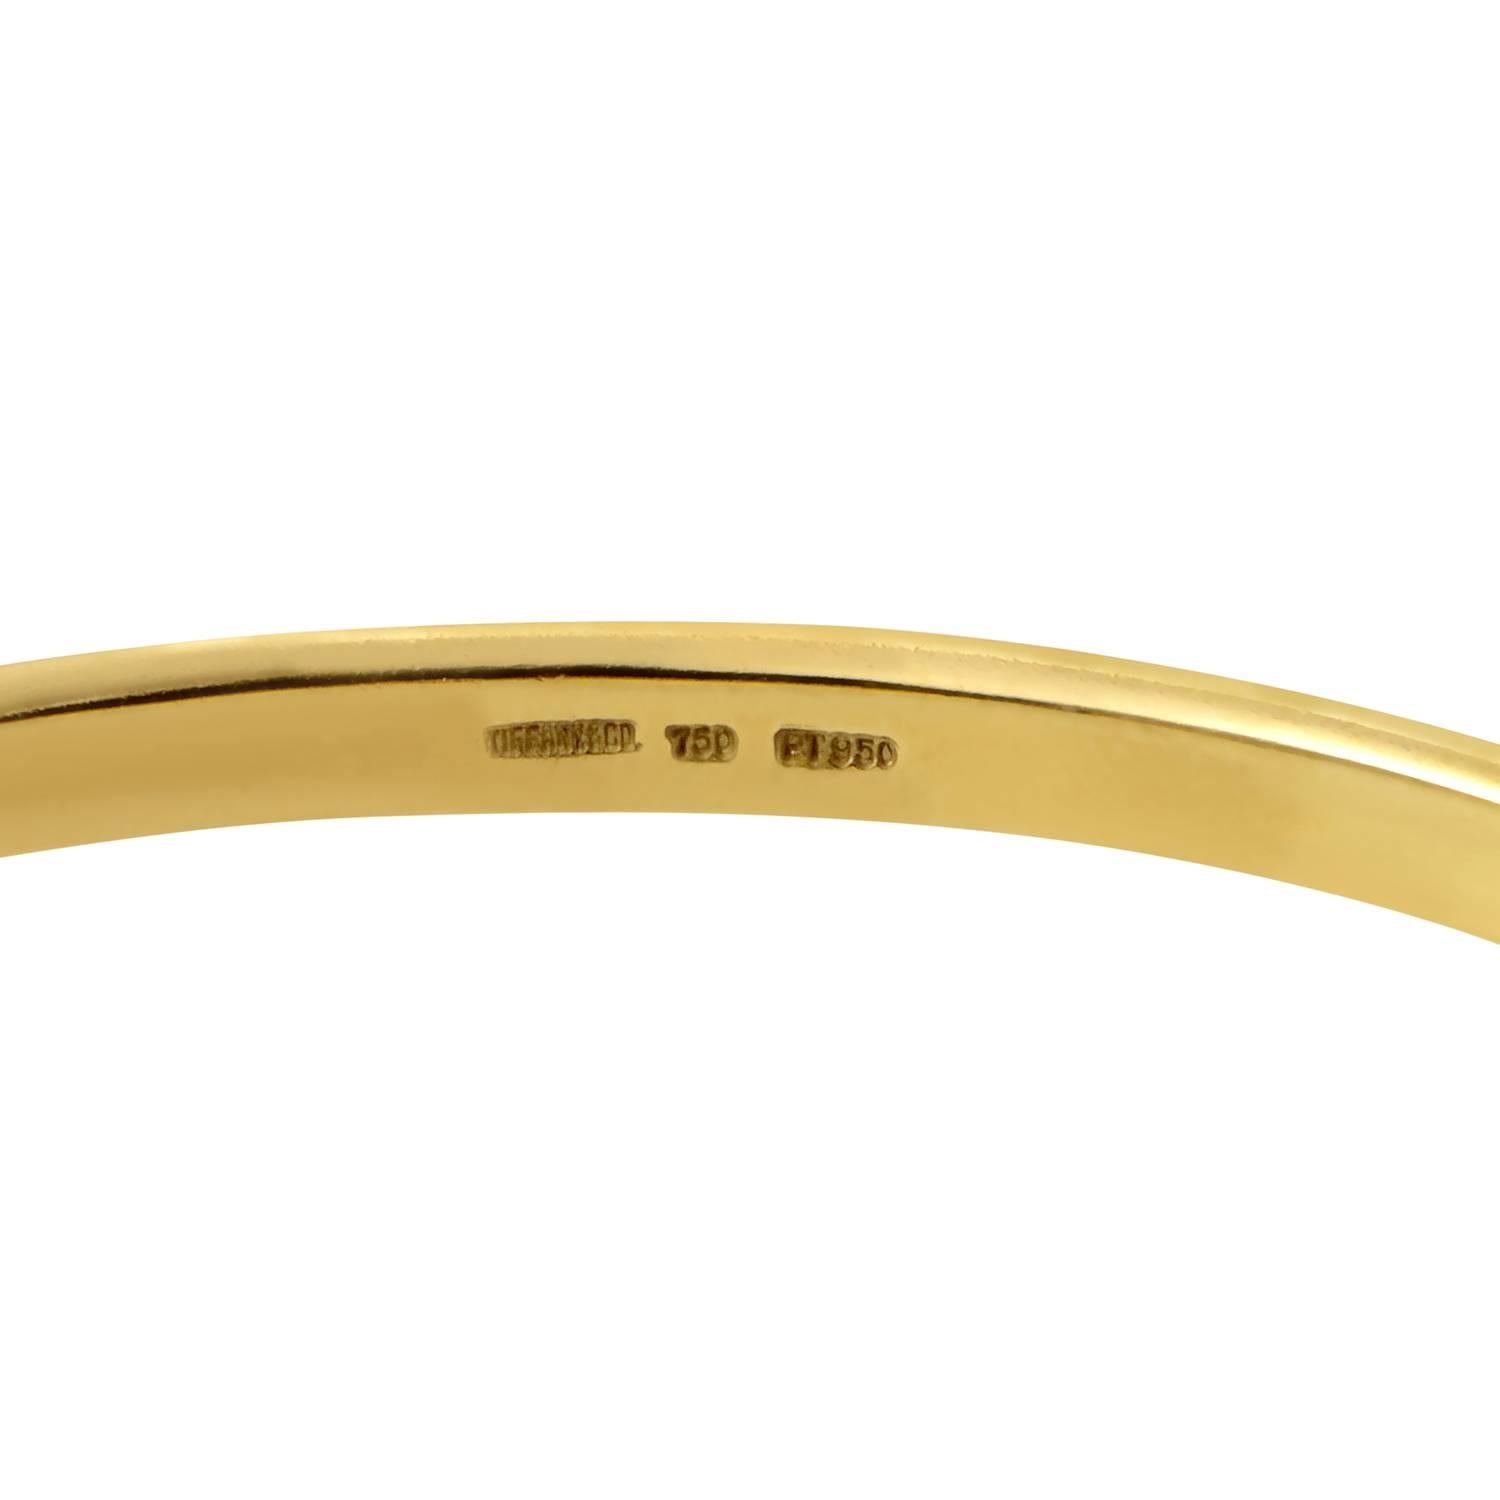 Broken only by the sparkling glare of luminous diamonds set in platinum scattered along in seemingly chaotic fashion, the gleaming, radiant surface of 18K yellow gold in this charming bangle brings a strong sense of understated elegance to this